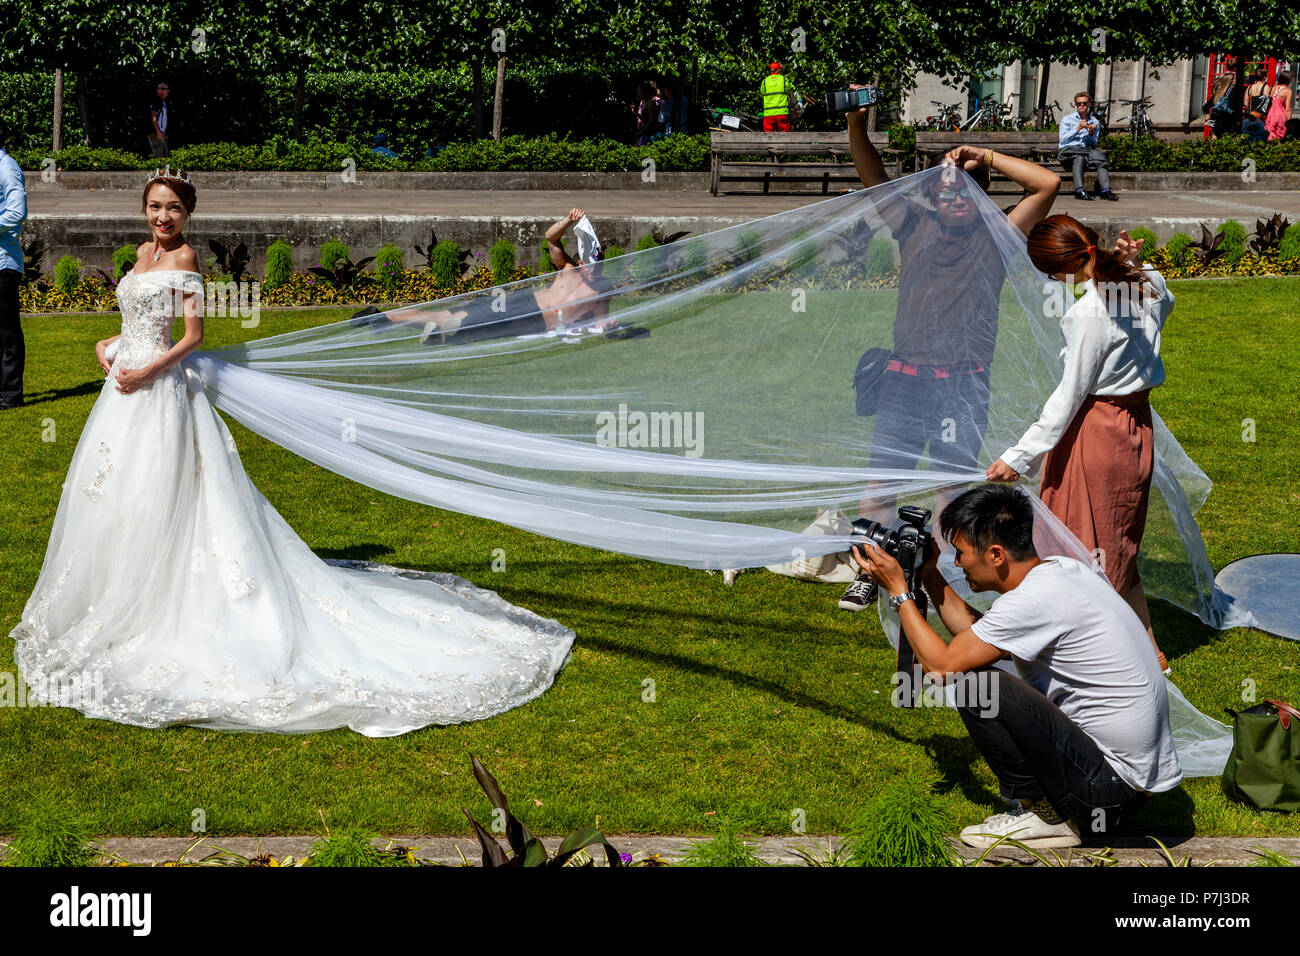 A Visiting Bride From Hong Kong Poses For Wedding Photography On The Lawns Outside St Paul’s Cathedral, London, England Stock Photo